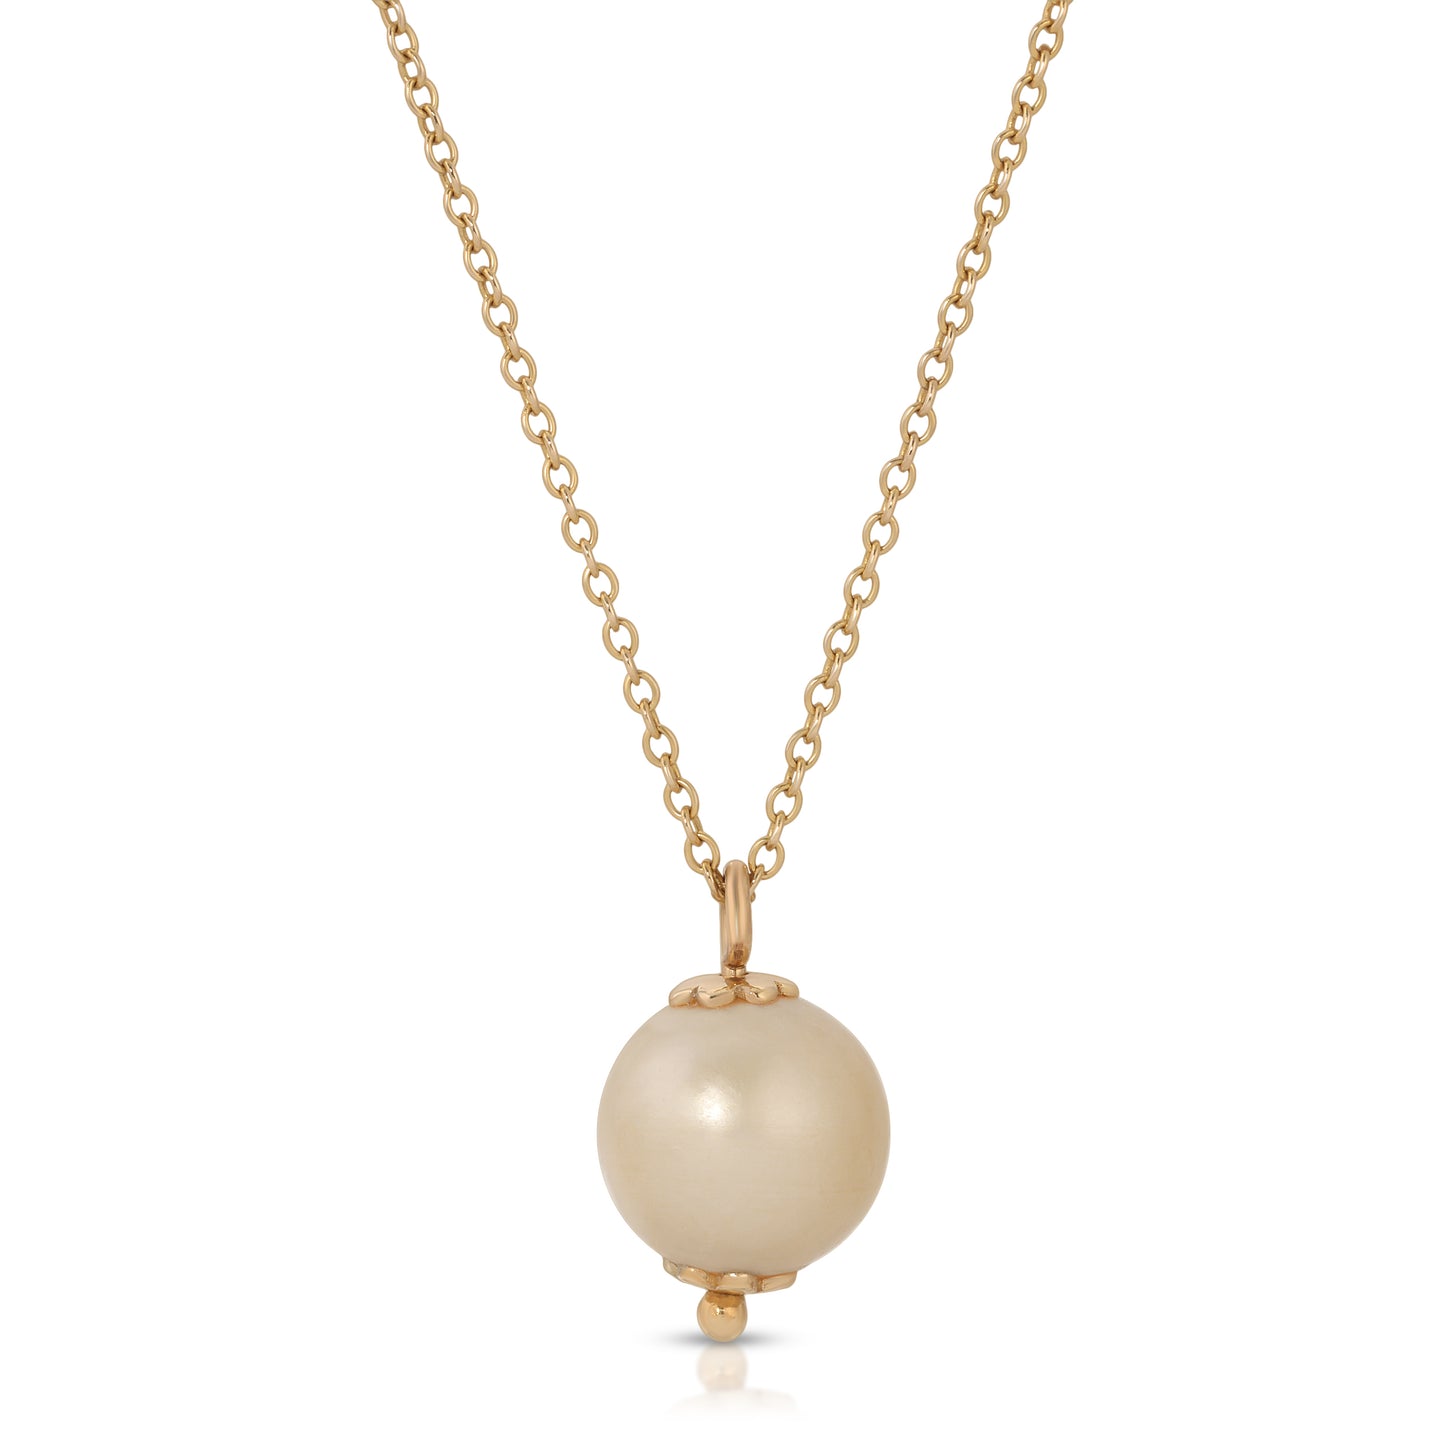 18K solid gold golden south sea pearl pendant on gold chain